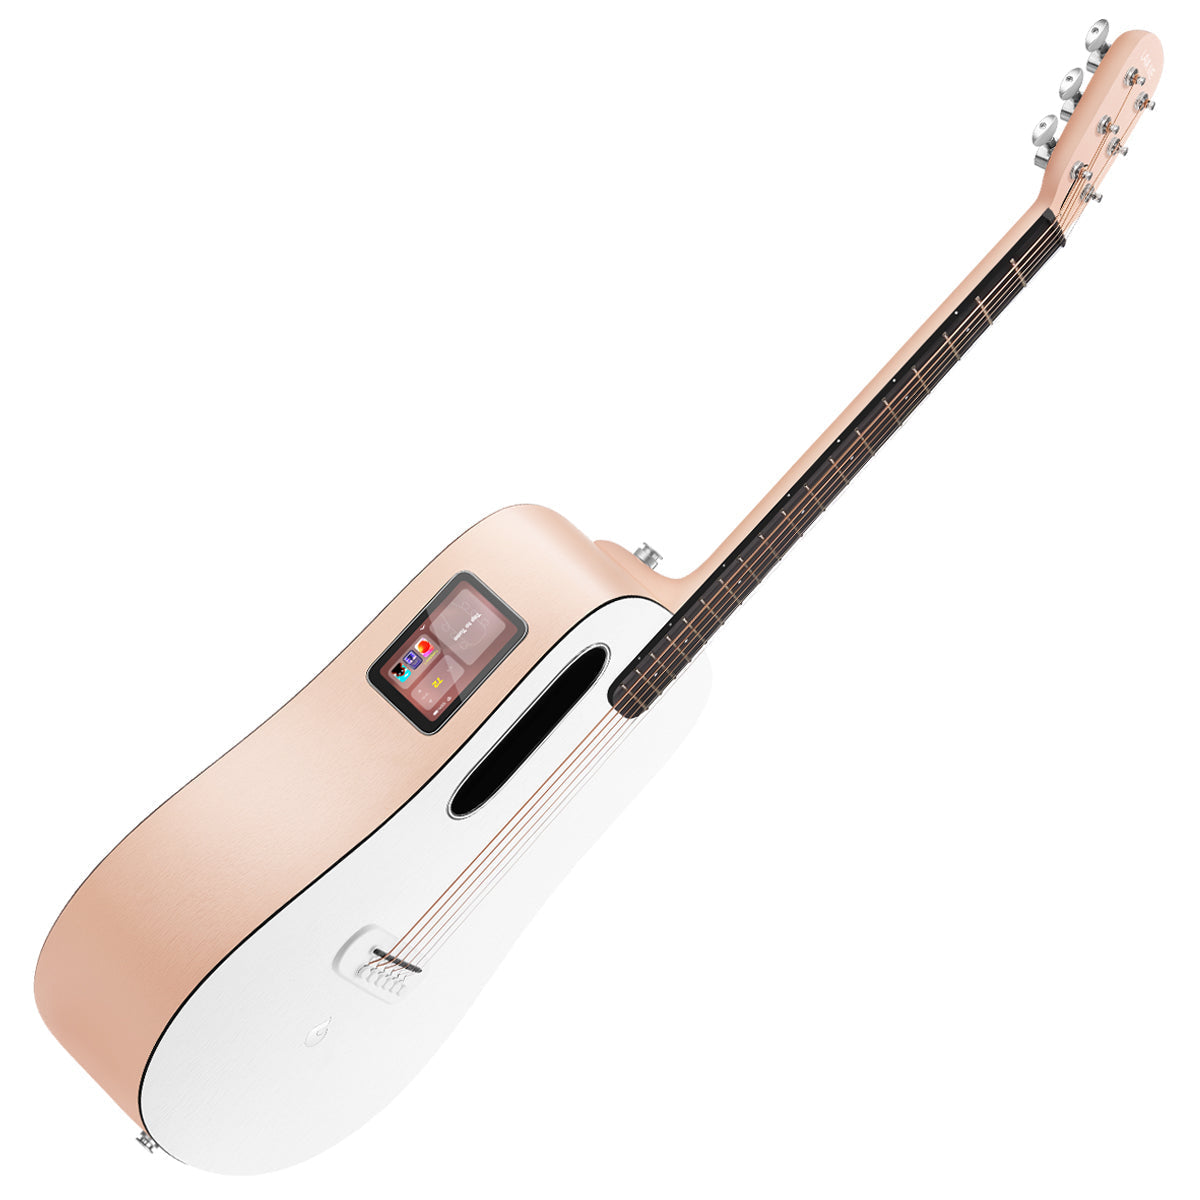 LAVA ME PLAY 36" with Lite Bag ~ Light Peach/Frost White, Acoustic Guitar for sale at Richards Guitars.